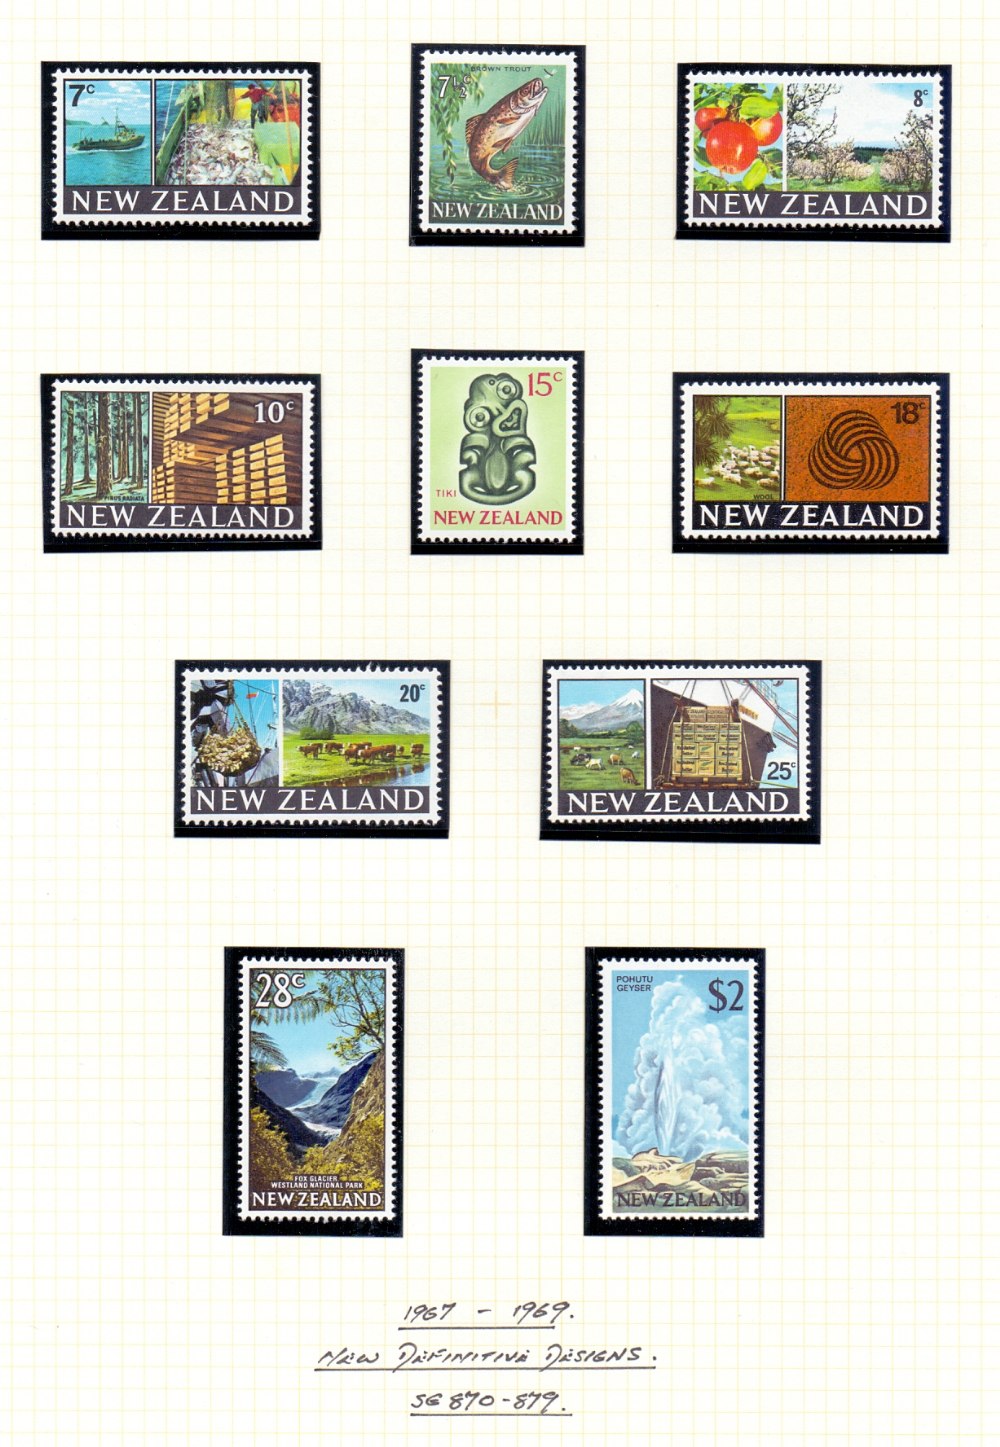 Commonwealth stamp collection in 4 albums, Ceylon, Christmas Islands, Cocos, Maldives, Mauritius, - Image 7 of 13